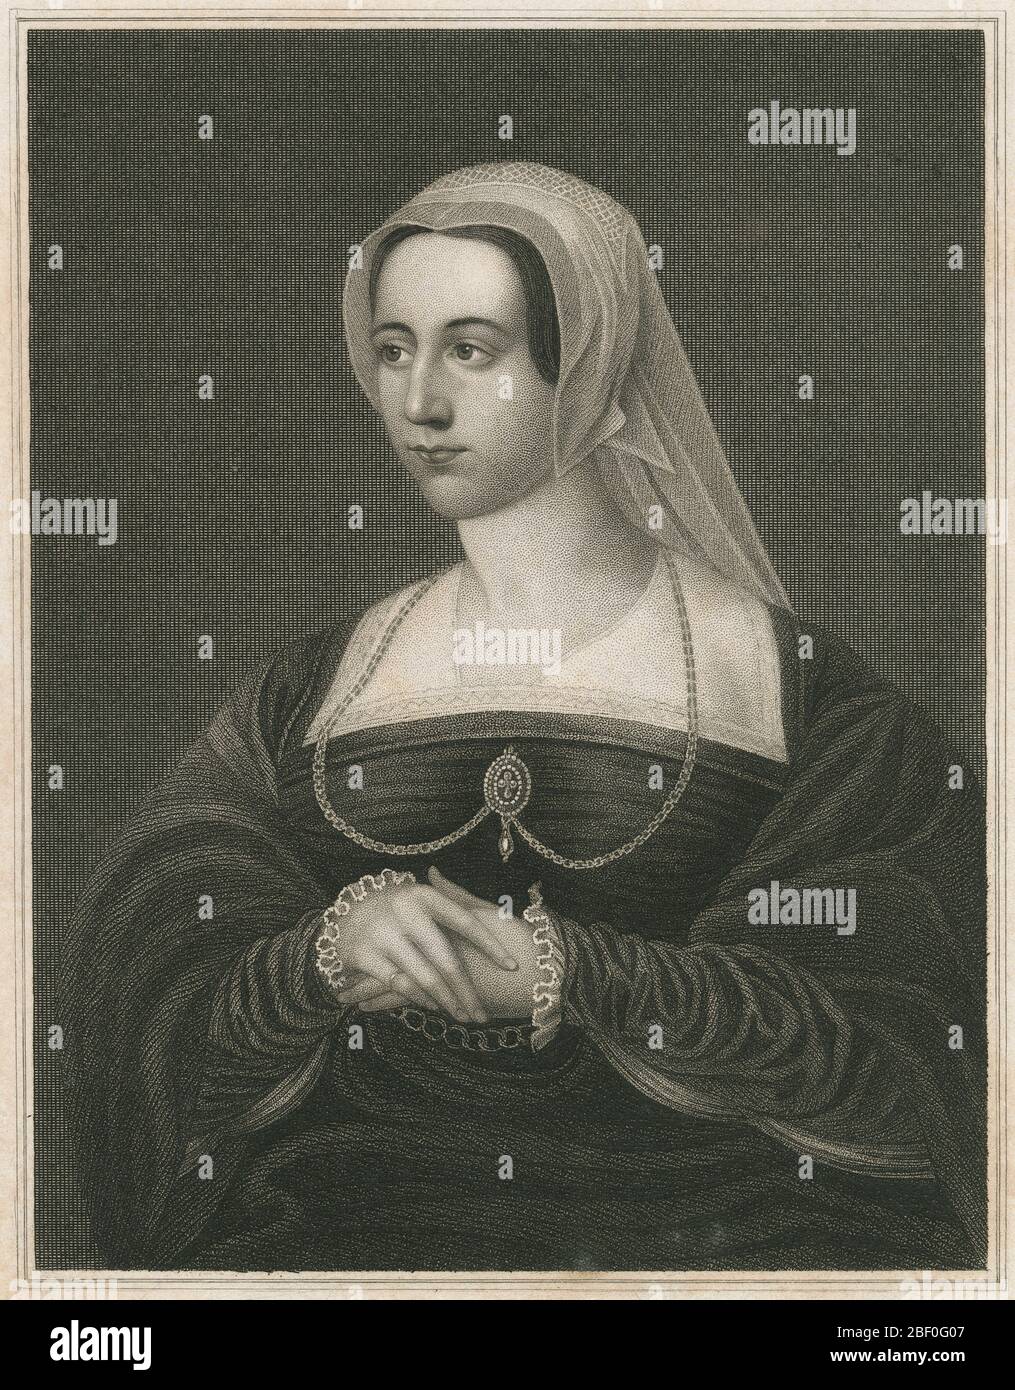 Antique 1829 engraving, Catherine Parr. Catherine Parr (1512-1548), was queen consort of England and Ireland (1543–47) as the last of the six wives of King Henry VIII, and the final queen consort of the House of Tudor. SOURCE: ORIGINAL ENGRAVING Stock Photo